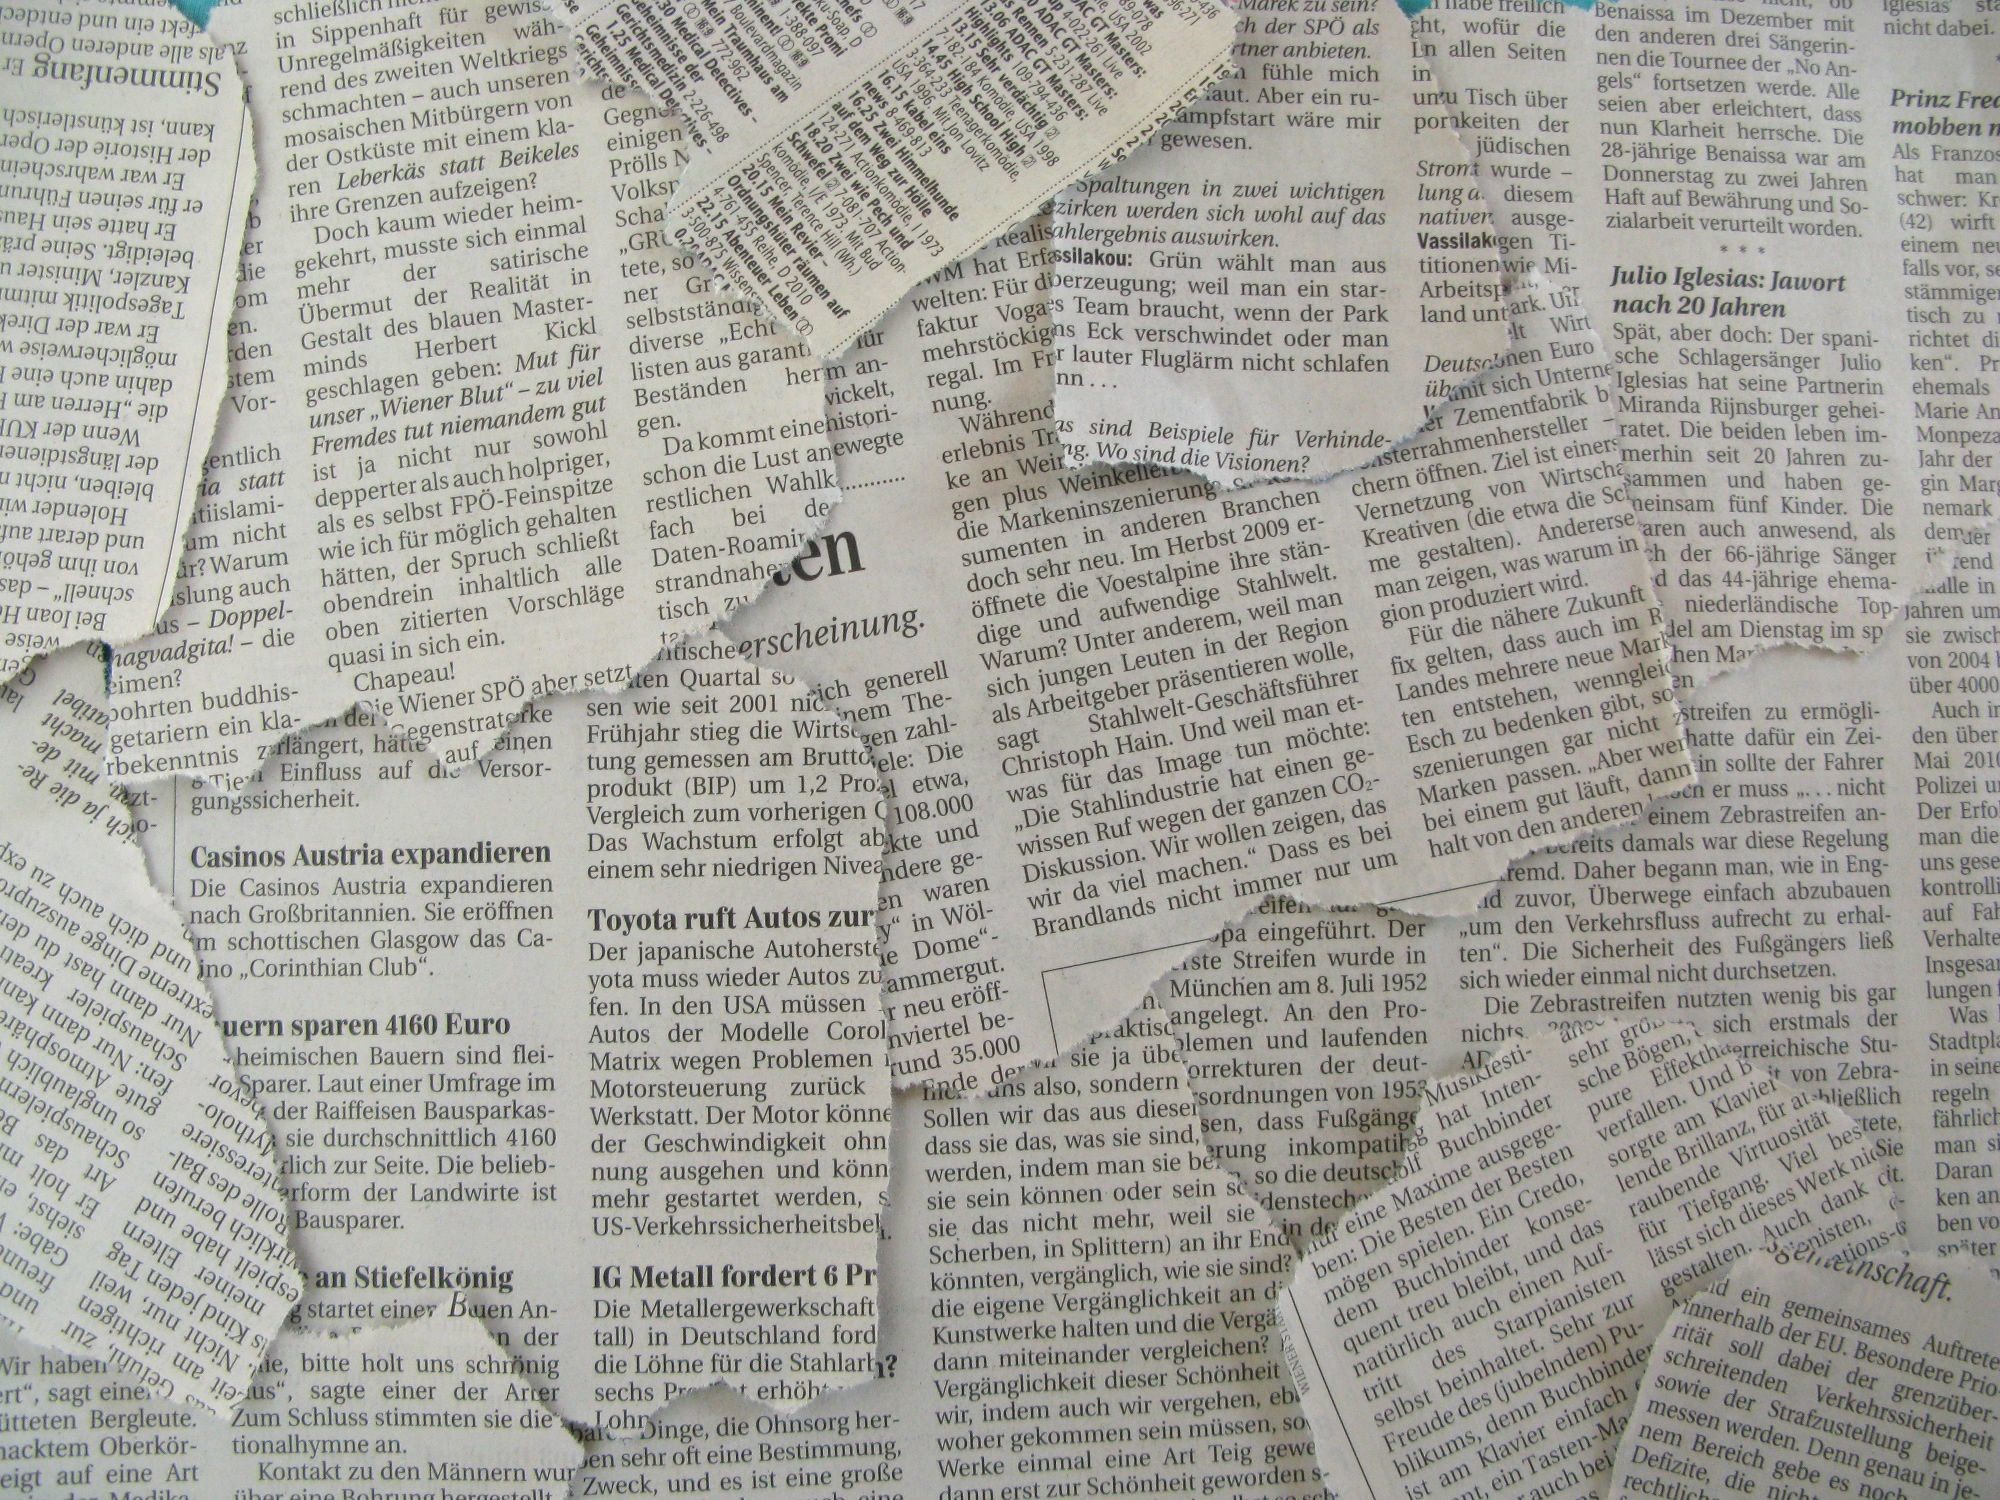 2000x1500 Newspapers, newspaper texture, background, download photos .